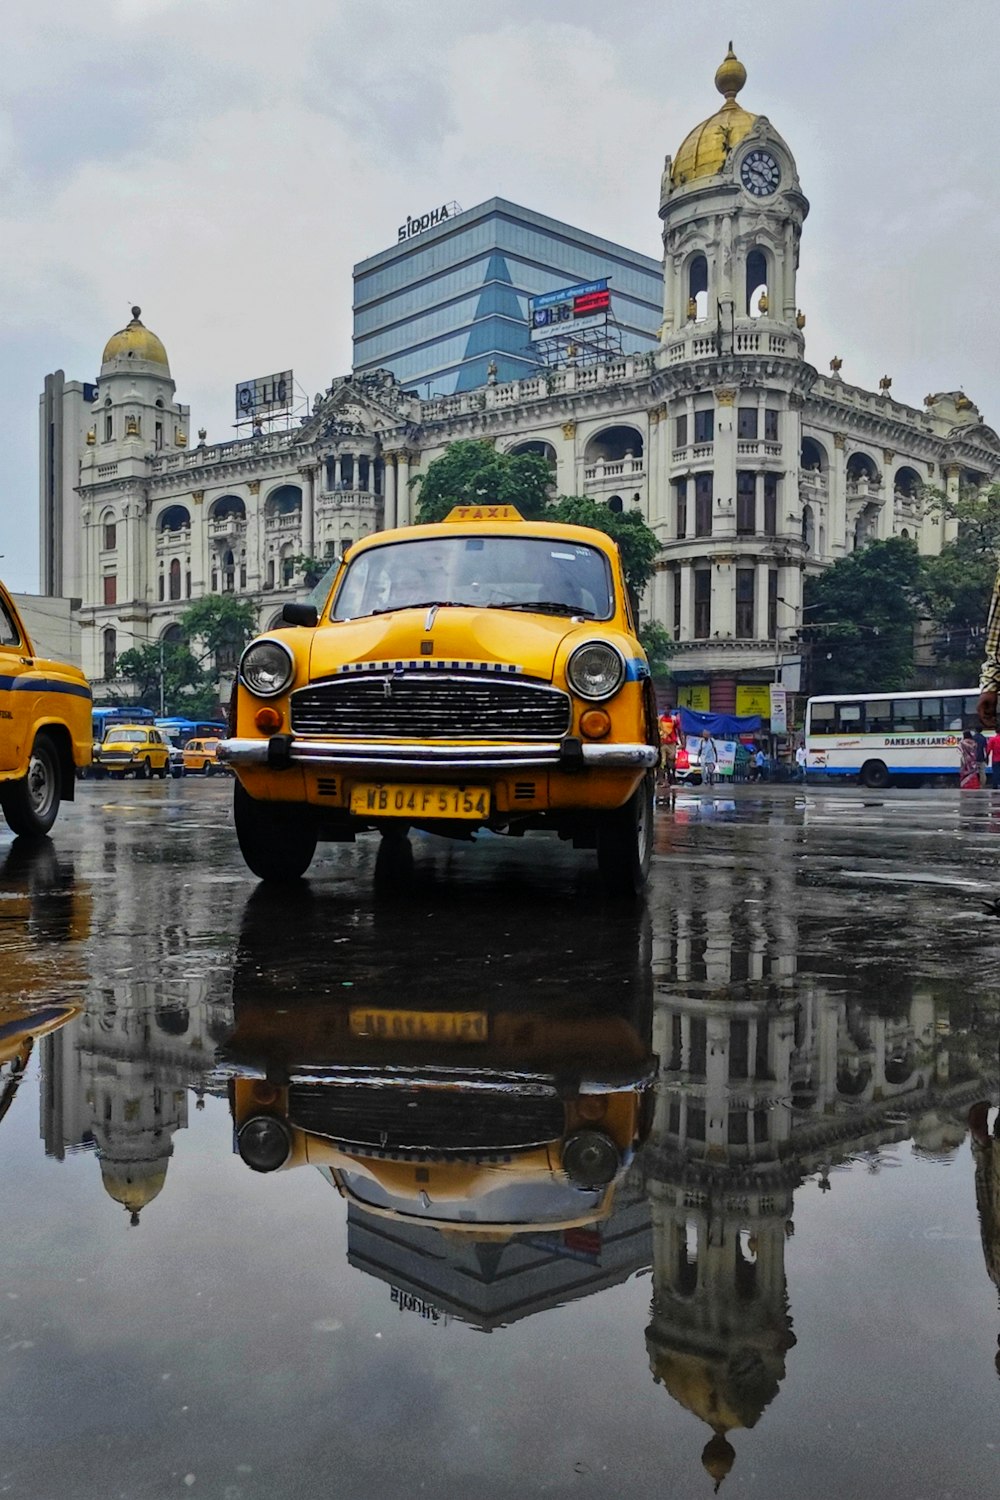 a yellow taxi cab driving down a street next to a tall building